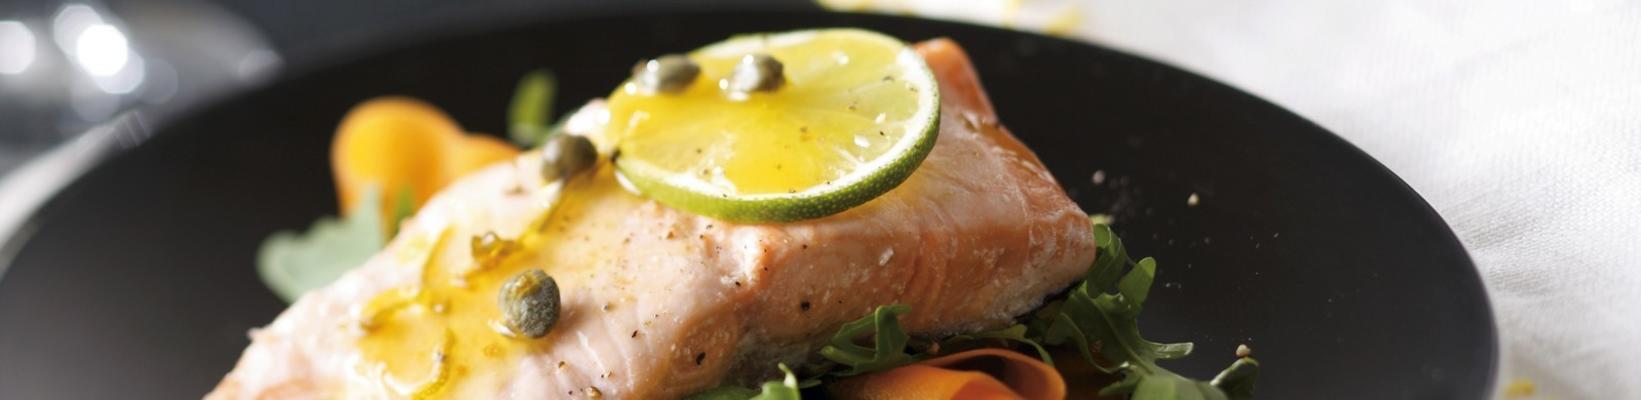 salmon with capers and lime sauce